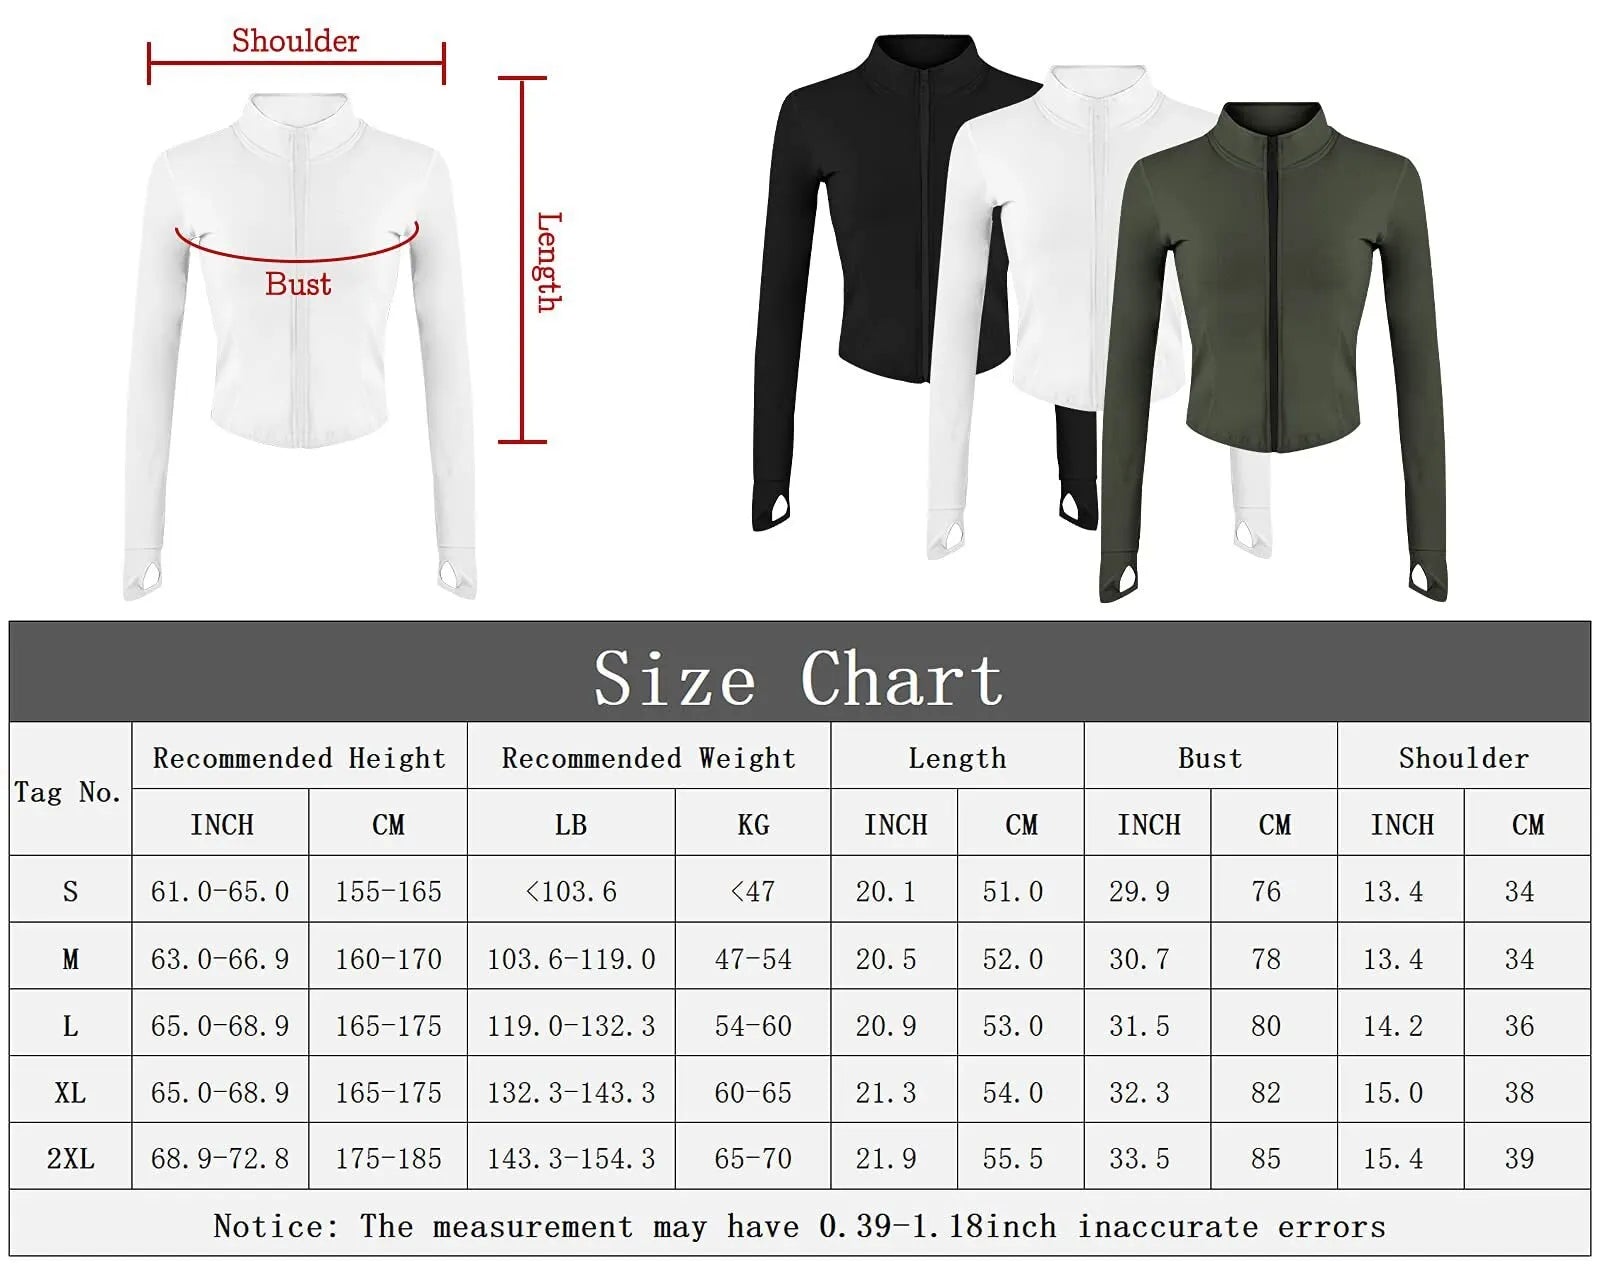 Women's Tracksuit Jacket Slim Fit Long Sleeved Fitness Coat Yoga Crop Tops With Thumb Holes Gym Jacket Workout Sweatshirts voguable